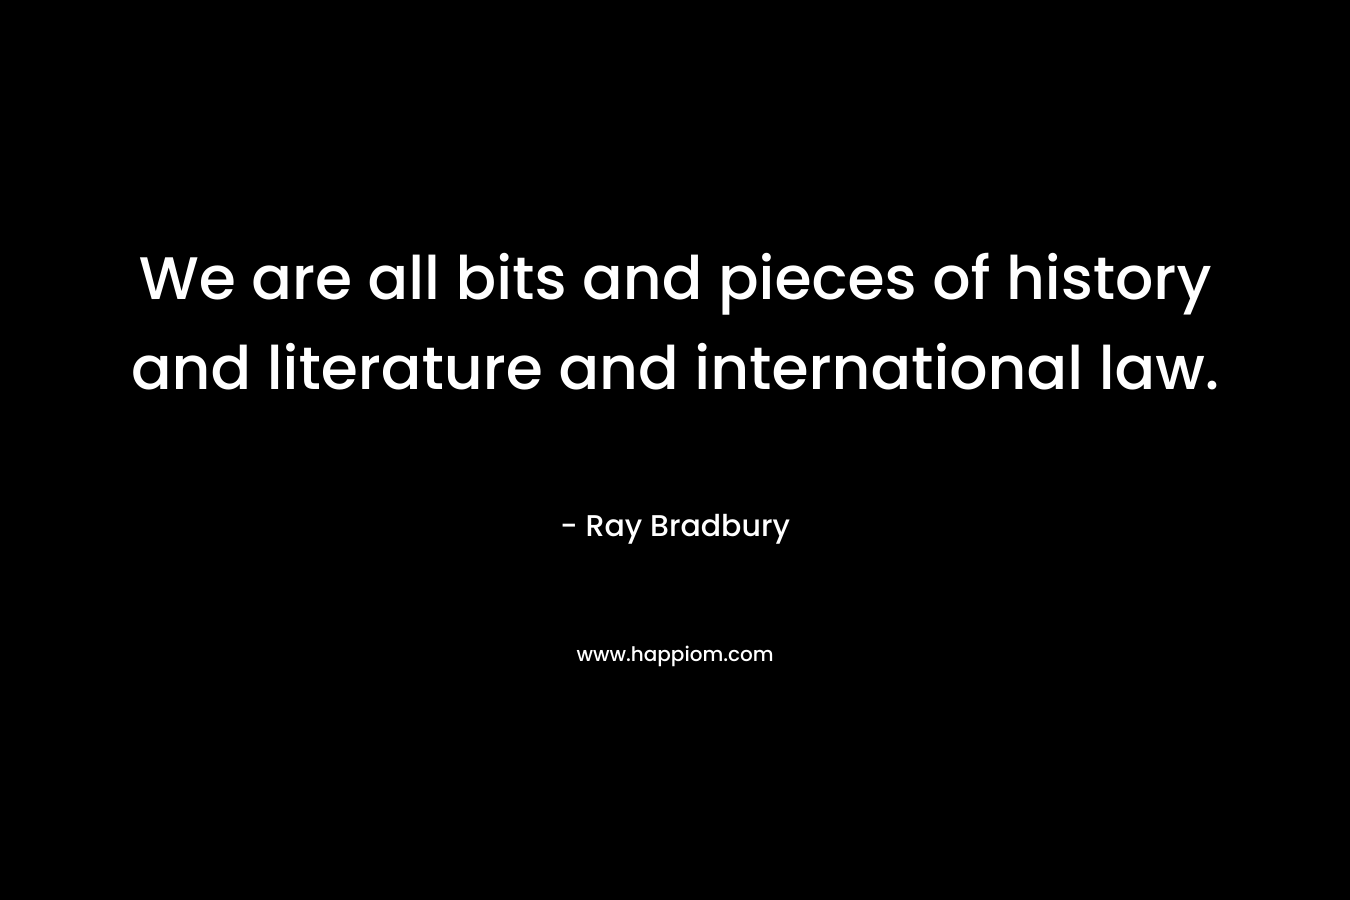 We are all bits and pieces of history and literature and international law.